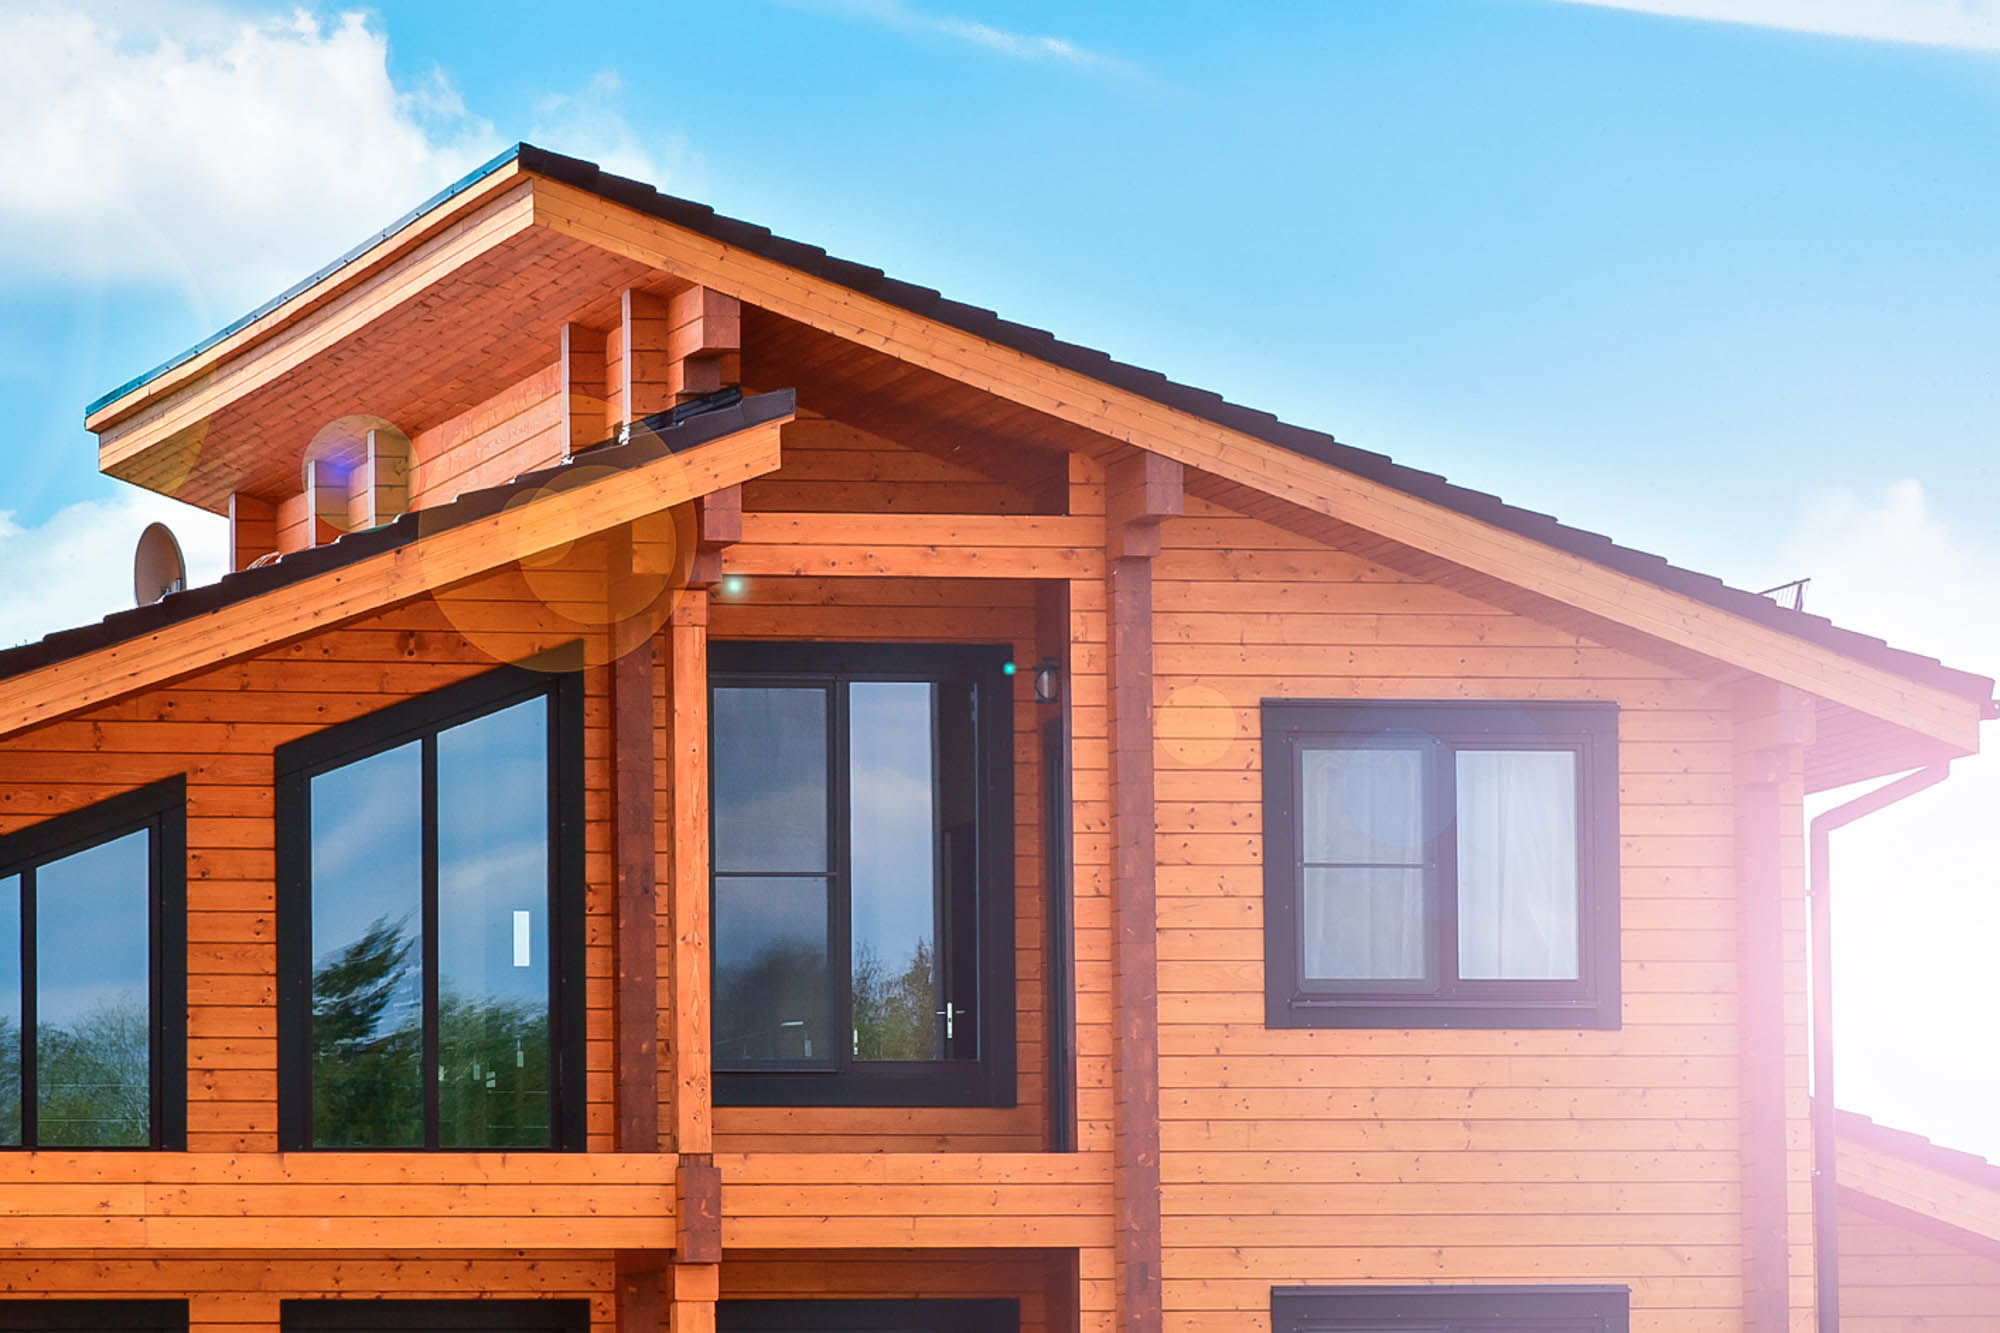 Why buy a wooden house? or why live in a prefabricated wooden house?